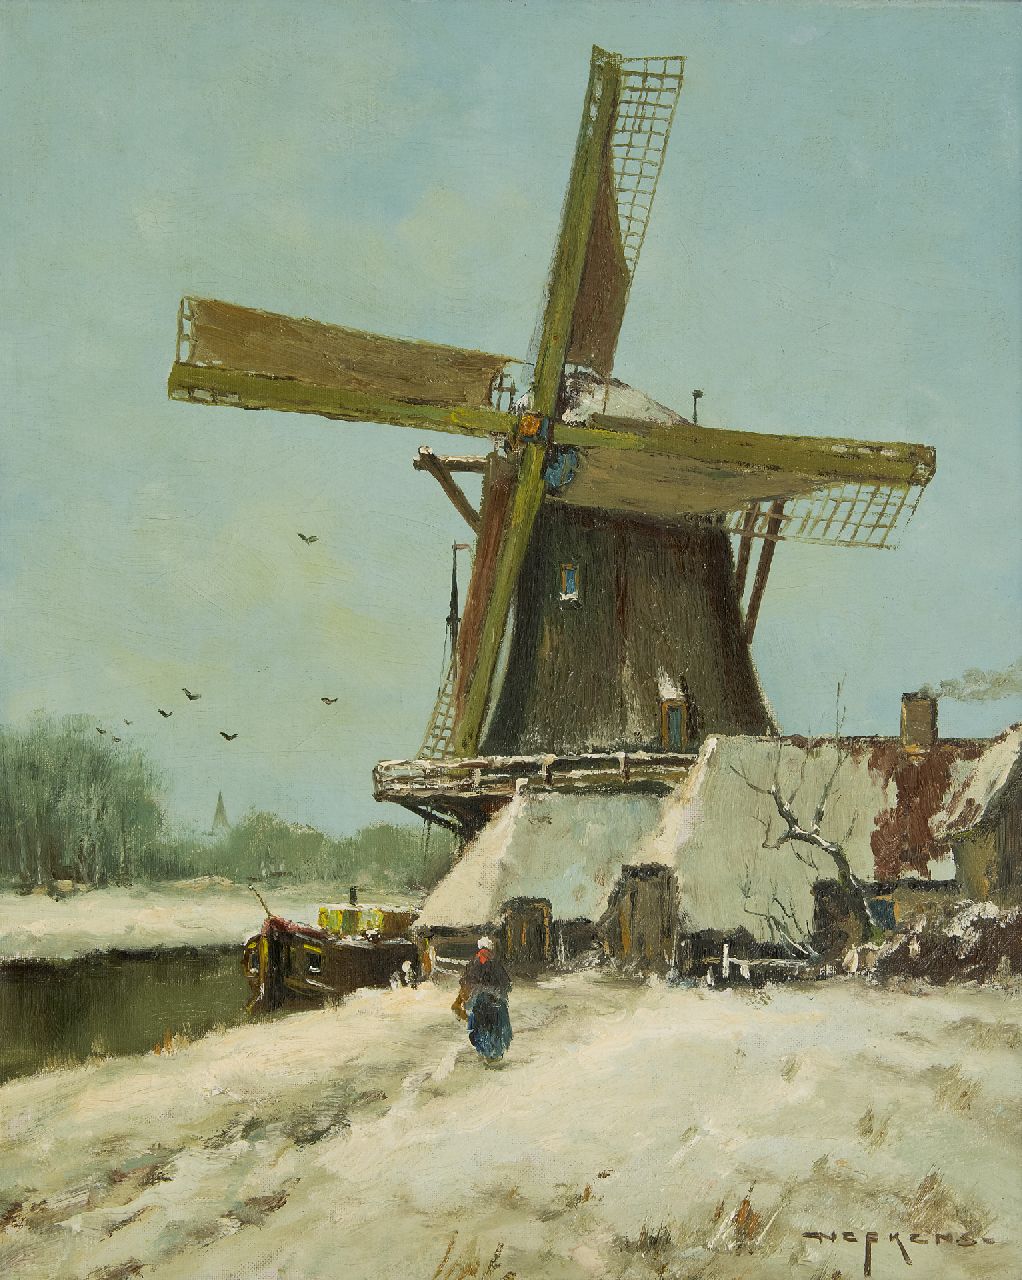 Nefkens M.J.  | Martinus Jacobus Nefkens | Paintings offered for sale | A windmill in a snowy landscape, oil on canvas 50.3 x 40.3 cm, signed l.r.